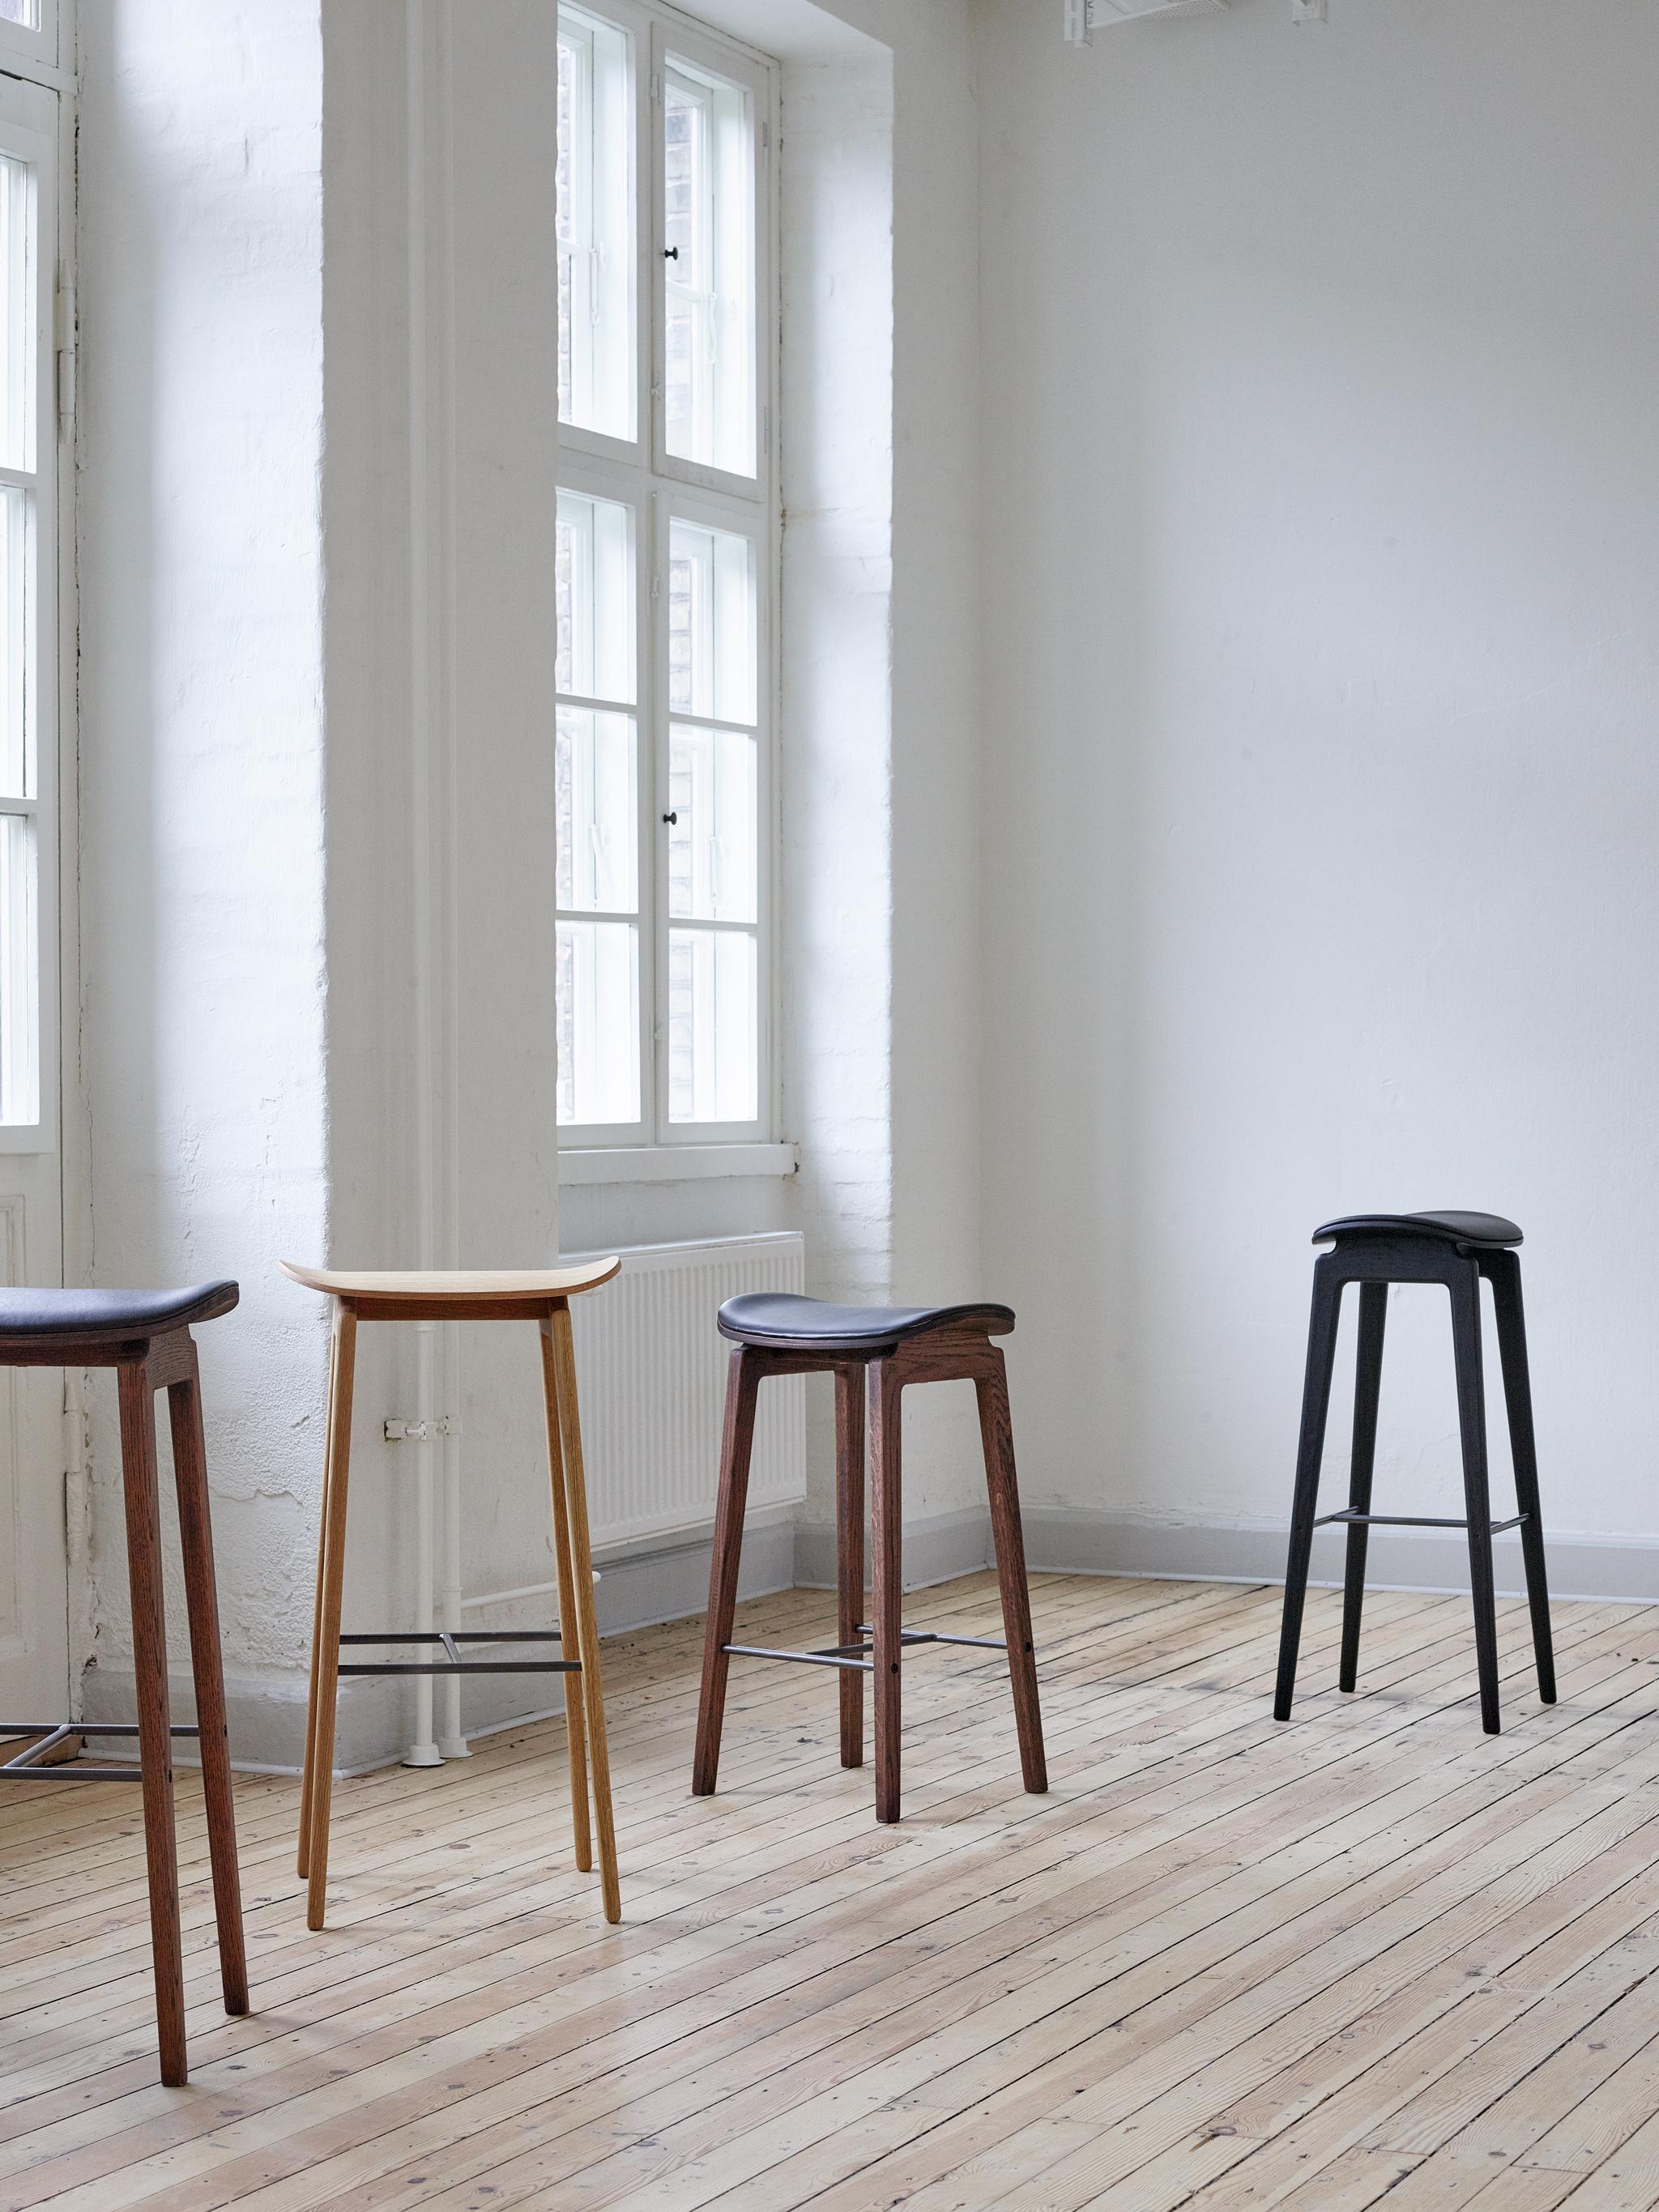 NY11 Bar Stool 75 by NORR11
Dimensions: D 30,5 x W 40,5 x H 75 cm.
Materials: Black oak and upholstery.
Upholstery: Dunes Camel 21004. 

Available in different oak finishes: Natural oak, light smoked oak, dark smoked oak, black oak. Also available